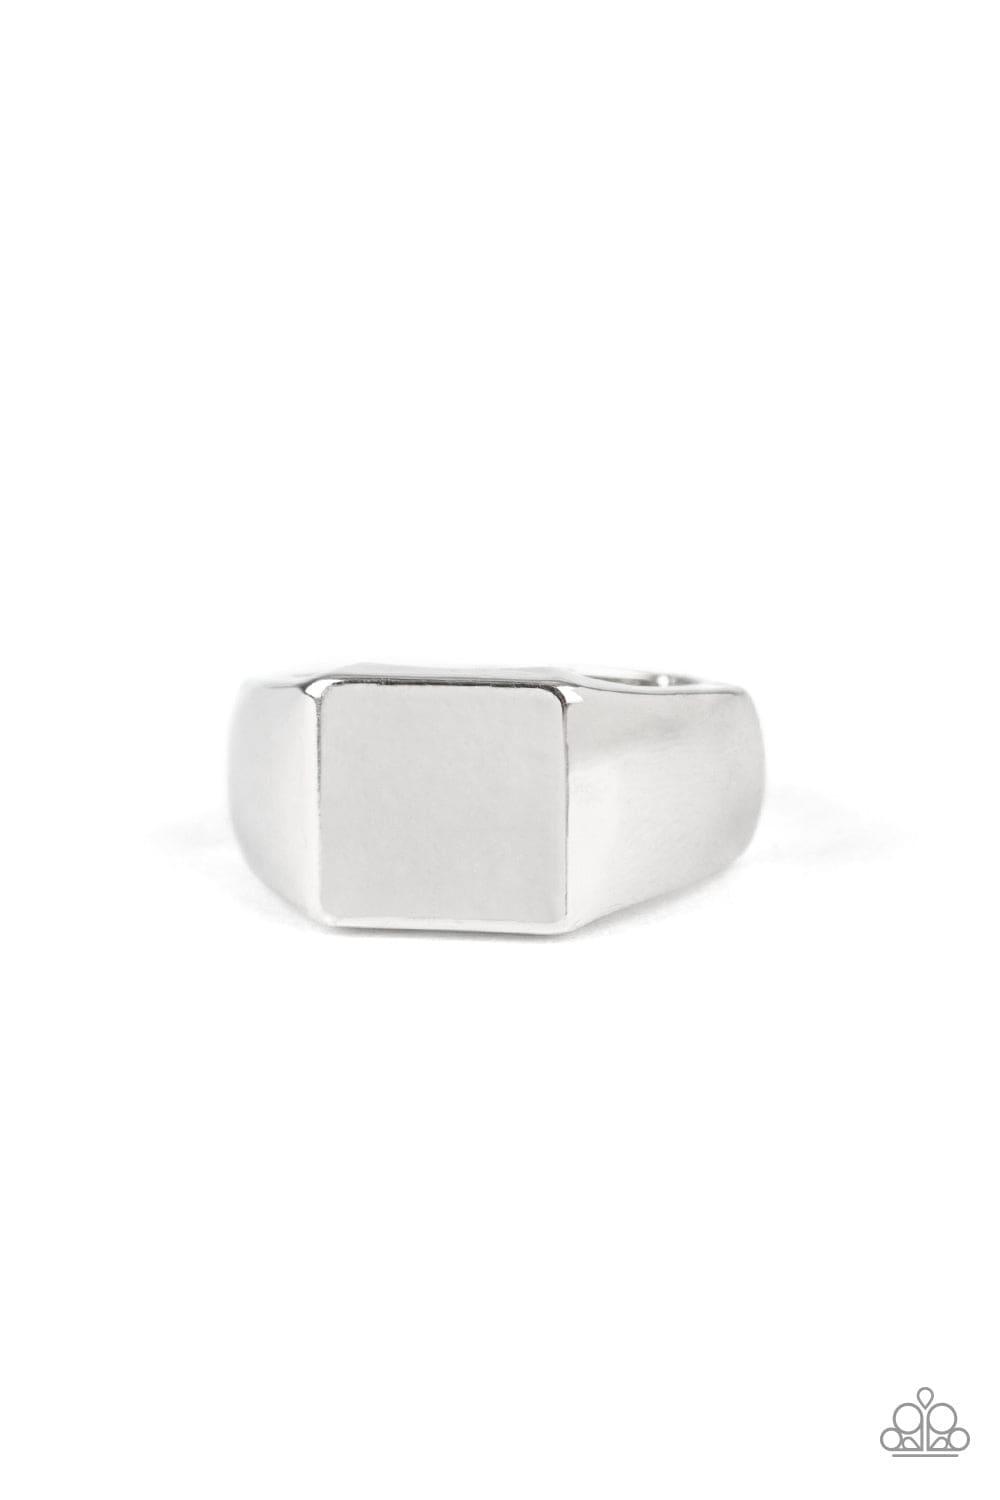 Paparazzi Accessories - Void - Silver Men's Ring - Bling by JessieK